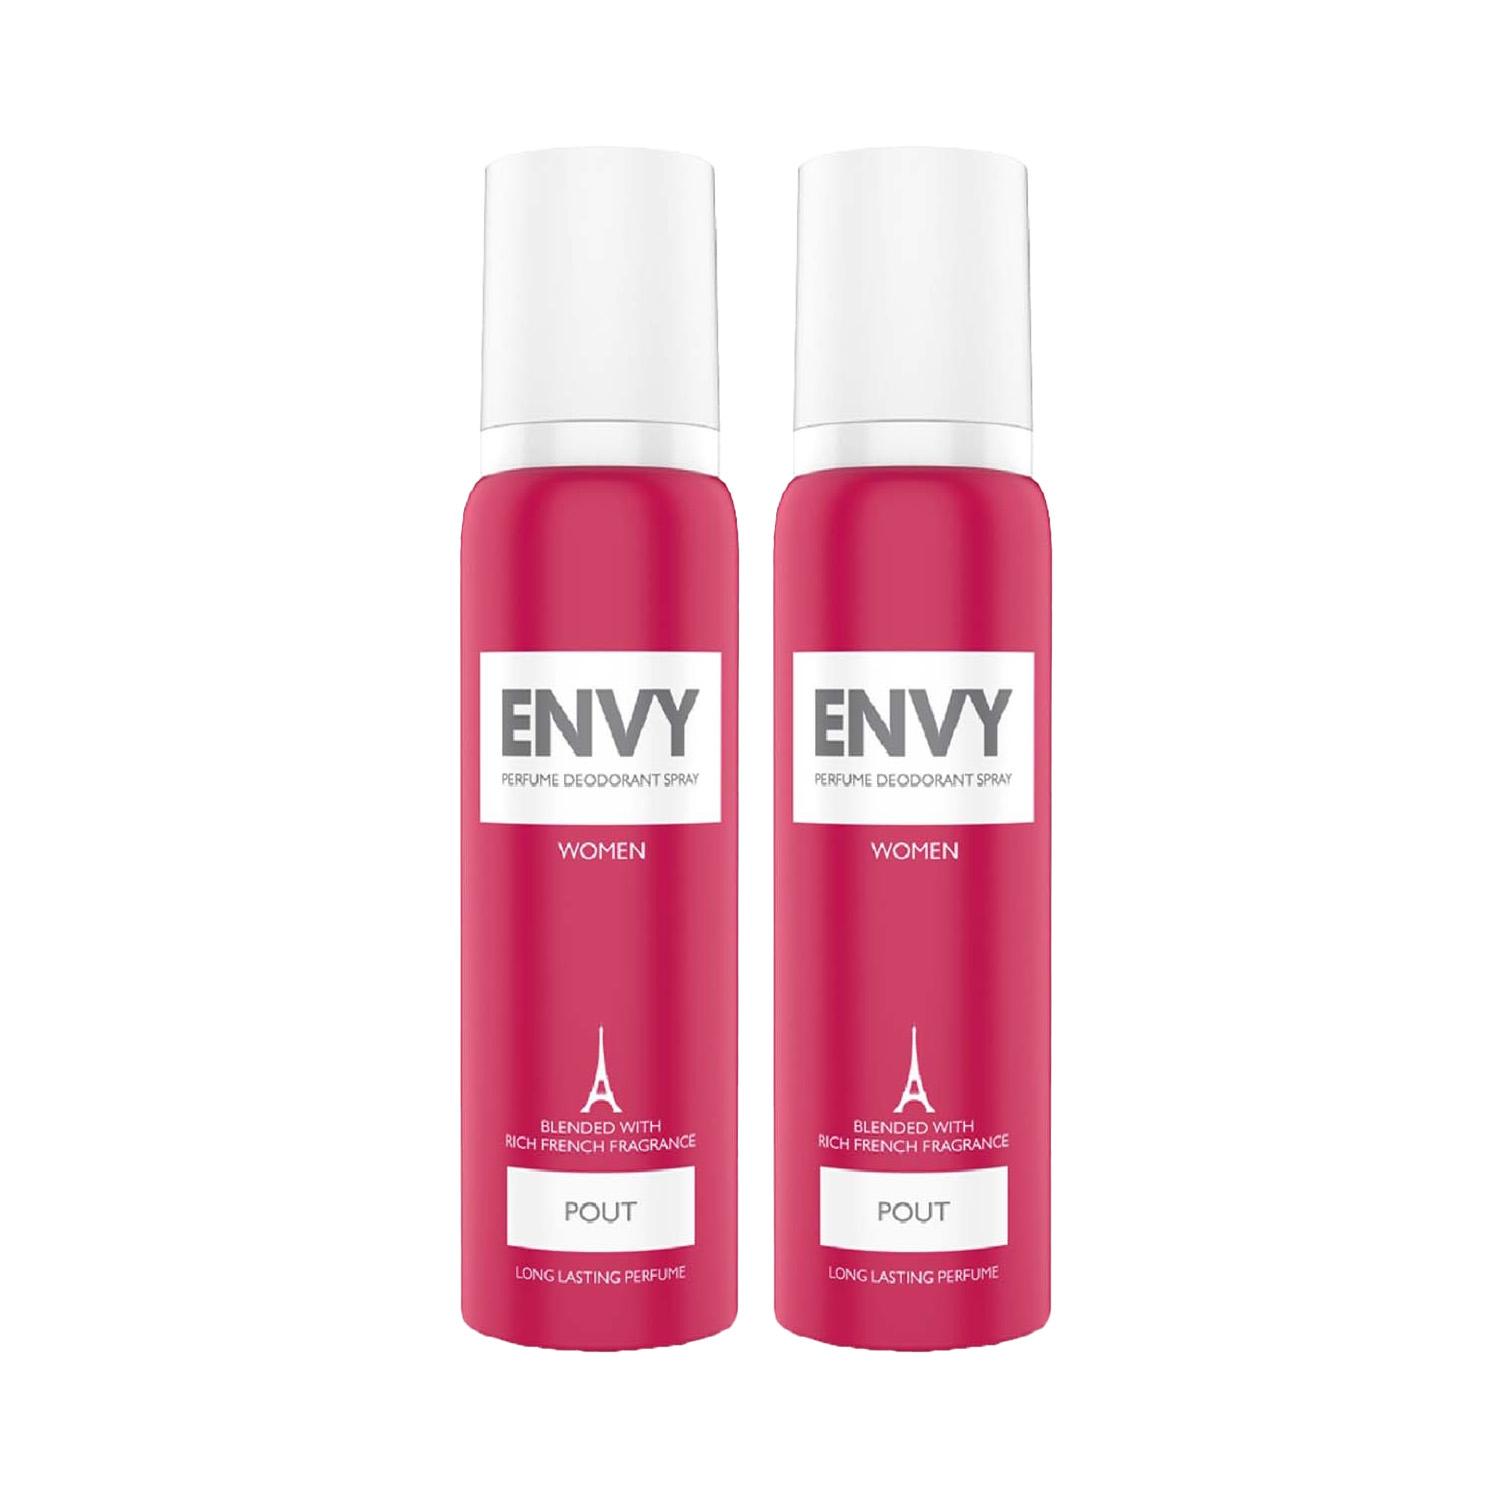 Envy | Envy Pout Deodorant For Women (120 ml) (Pack of 2) Combo